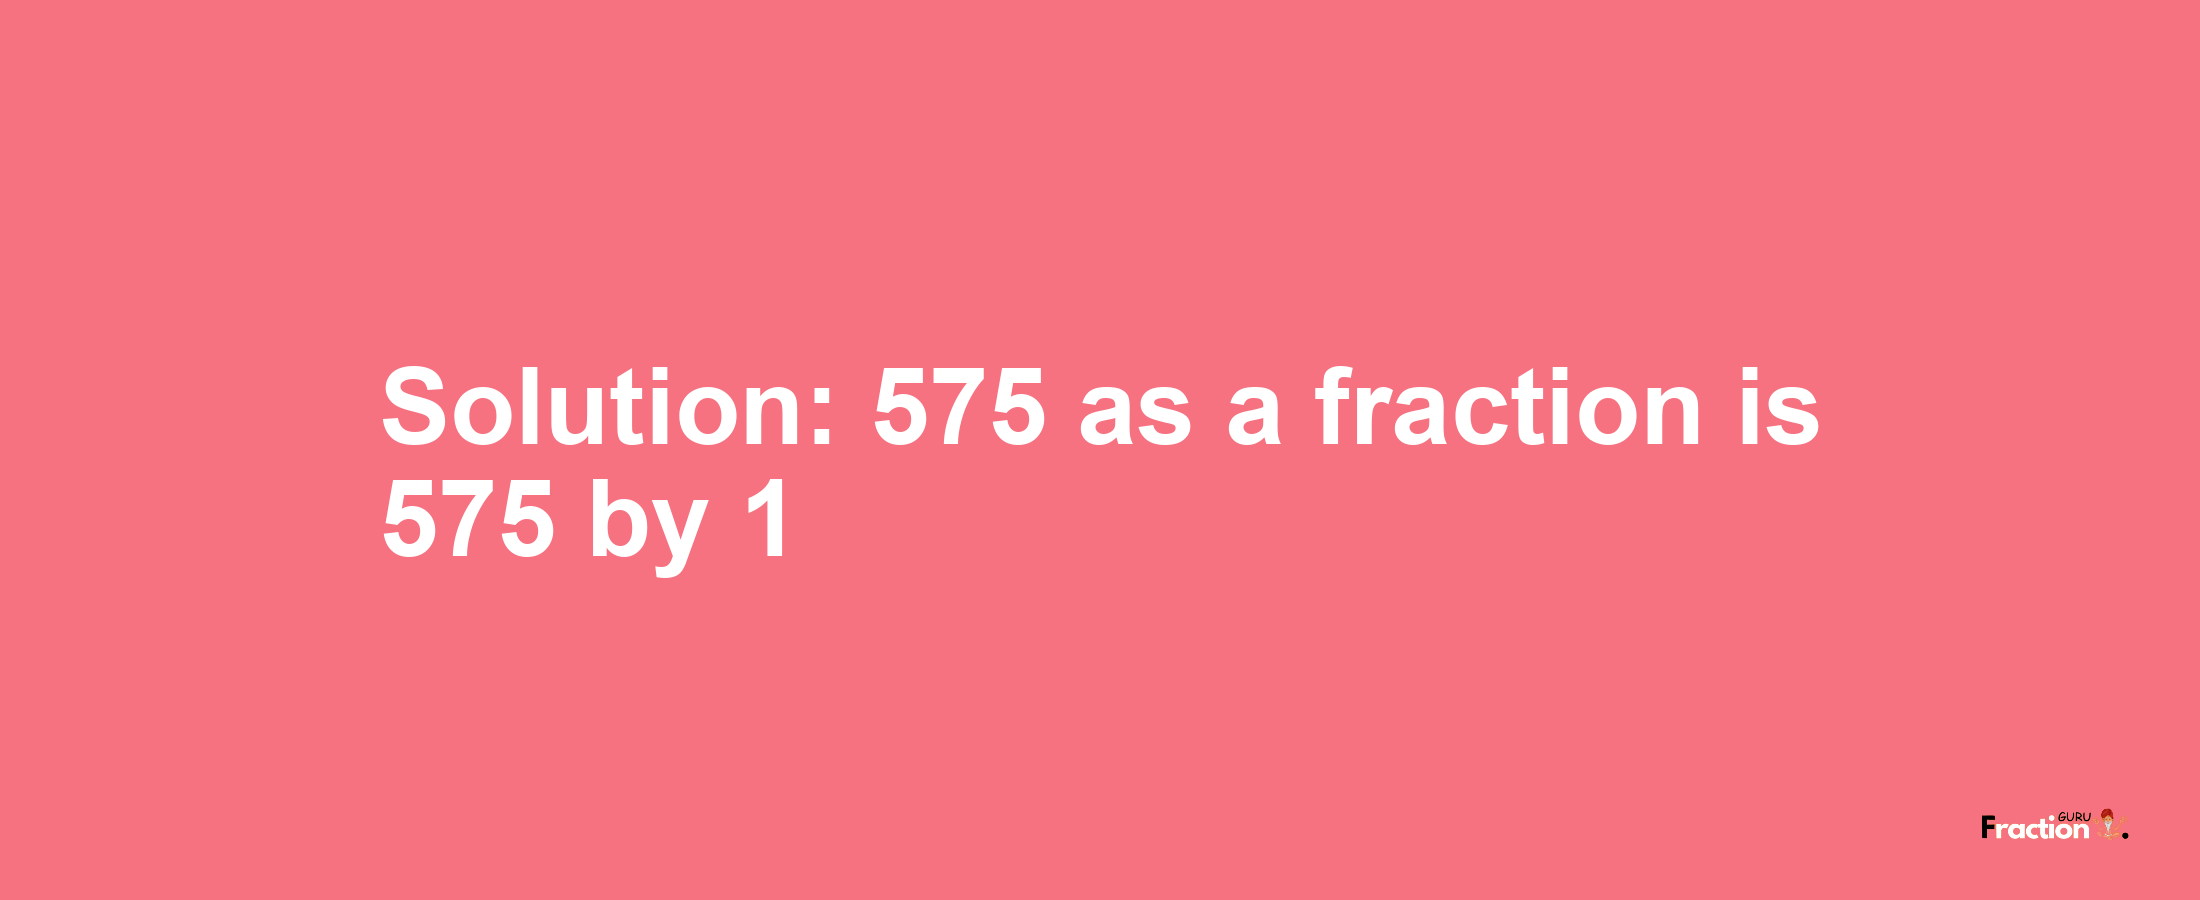 Solution:575 as a fraction is 575/1